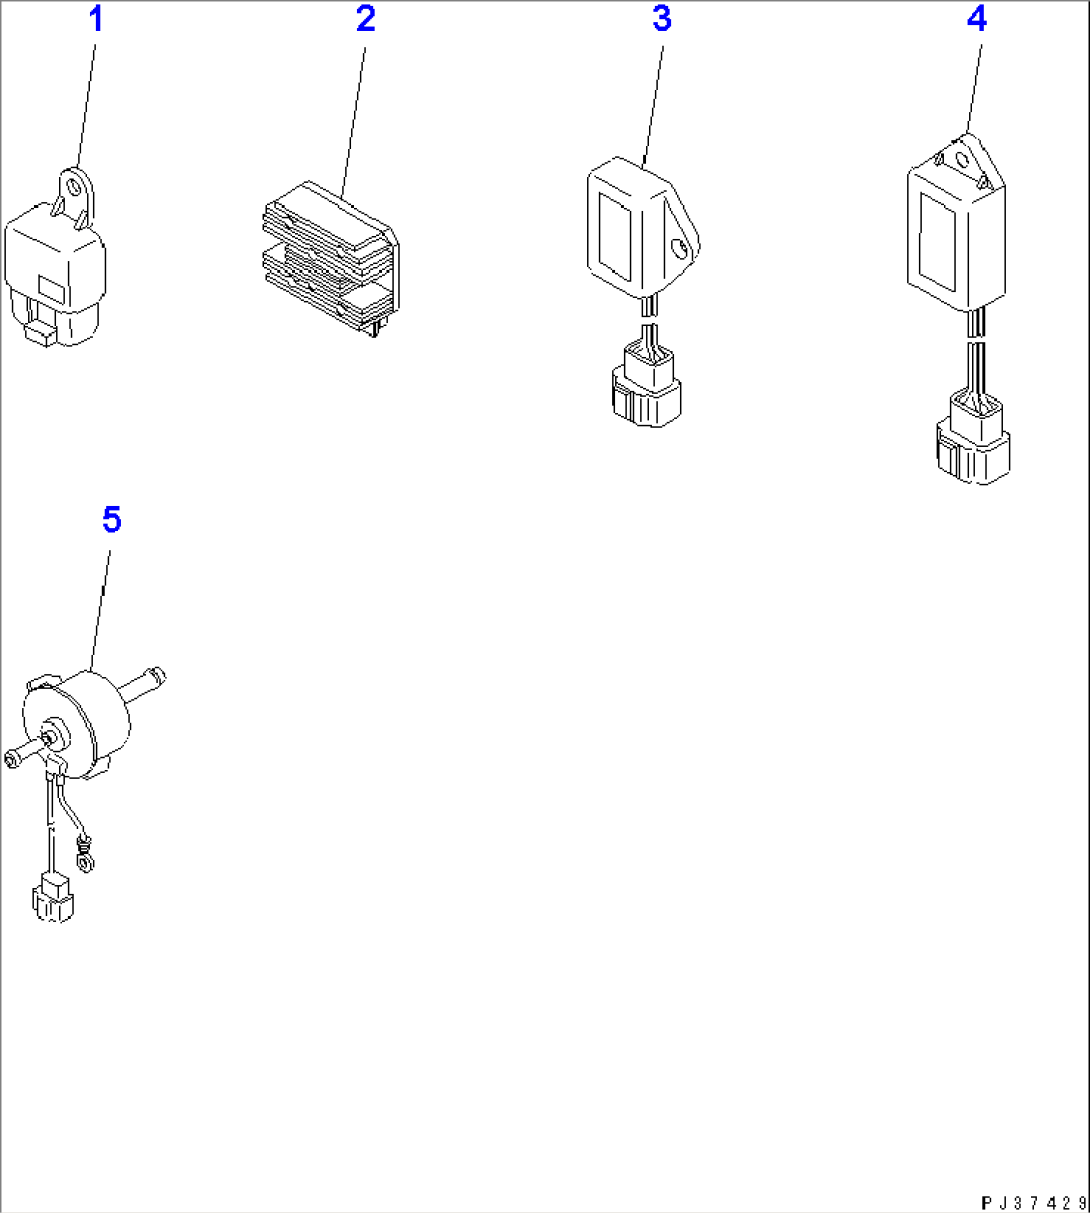 FORWARDED INDIVIDUALLY PARTS (ELECTRICAL PARTS)